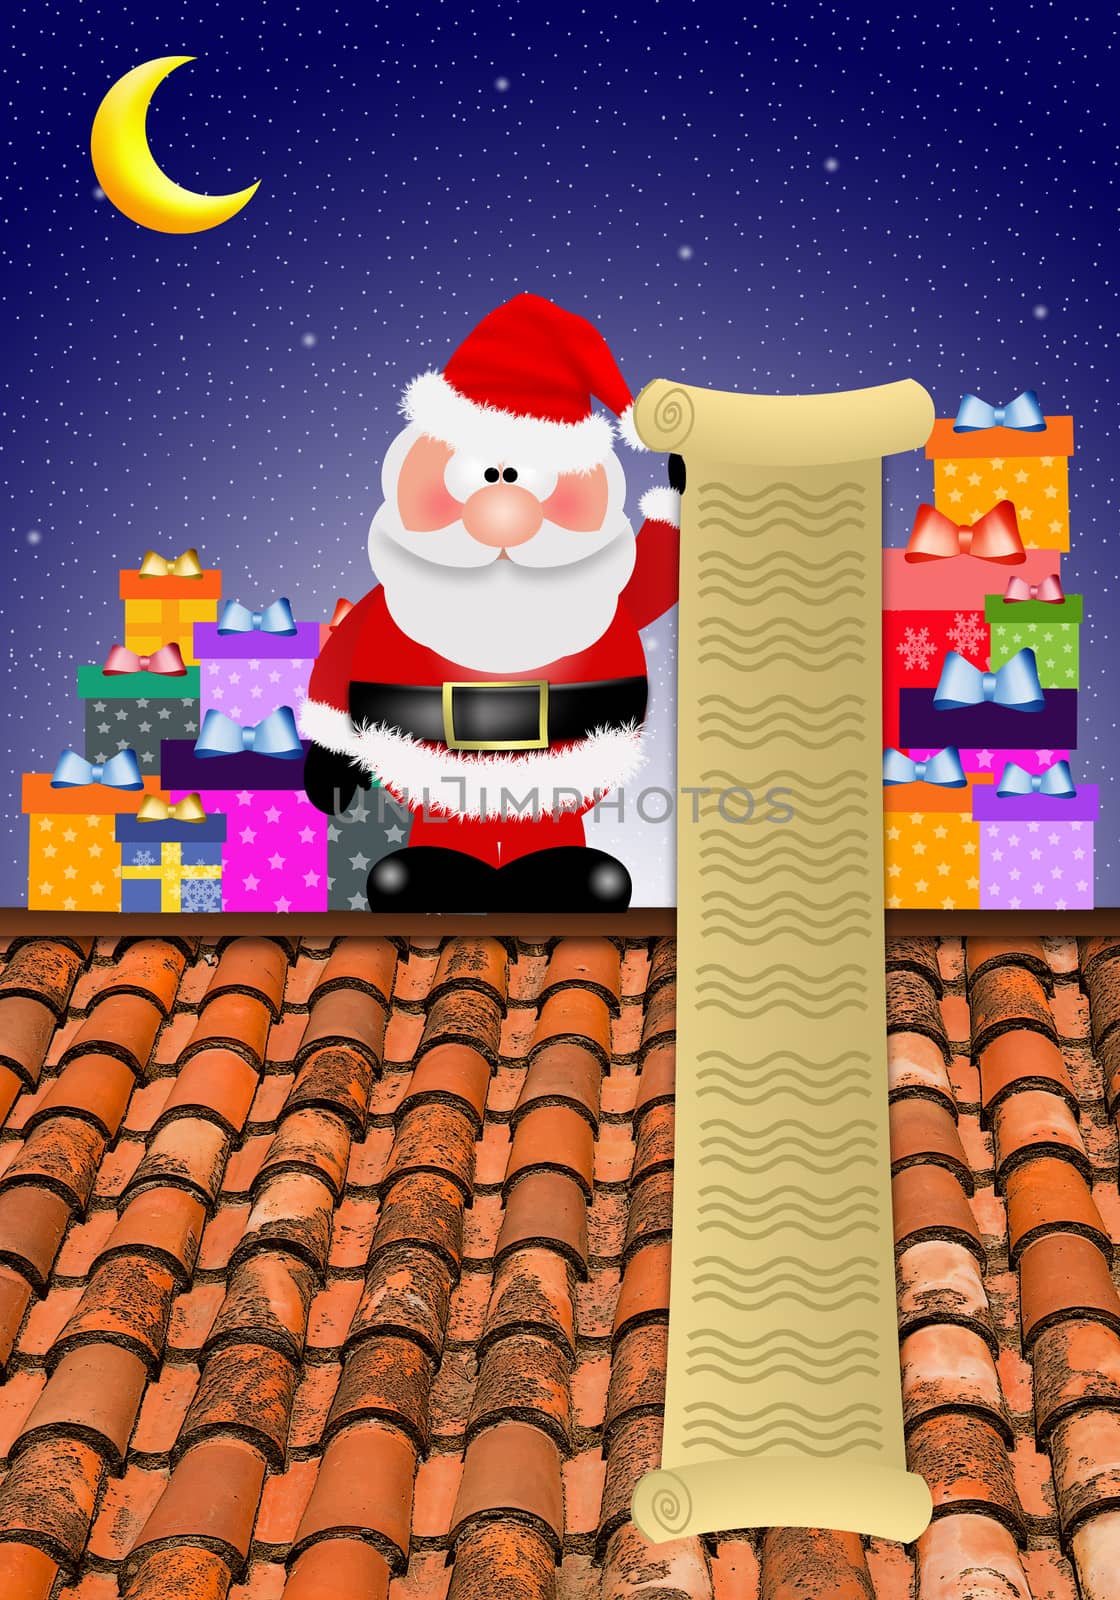 Santa Claus on the roof by sognolucido